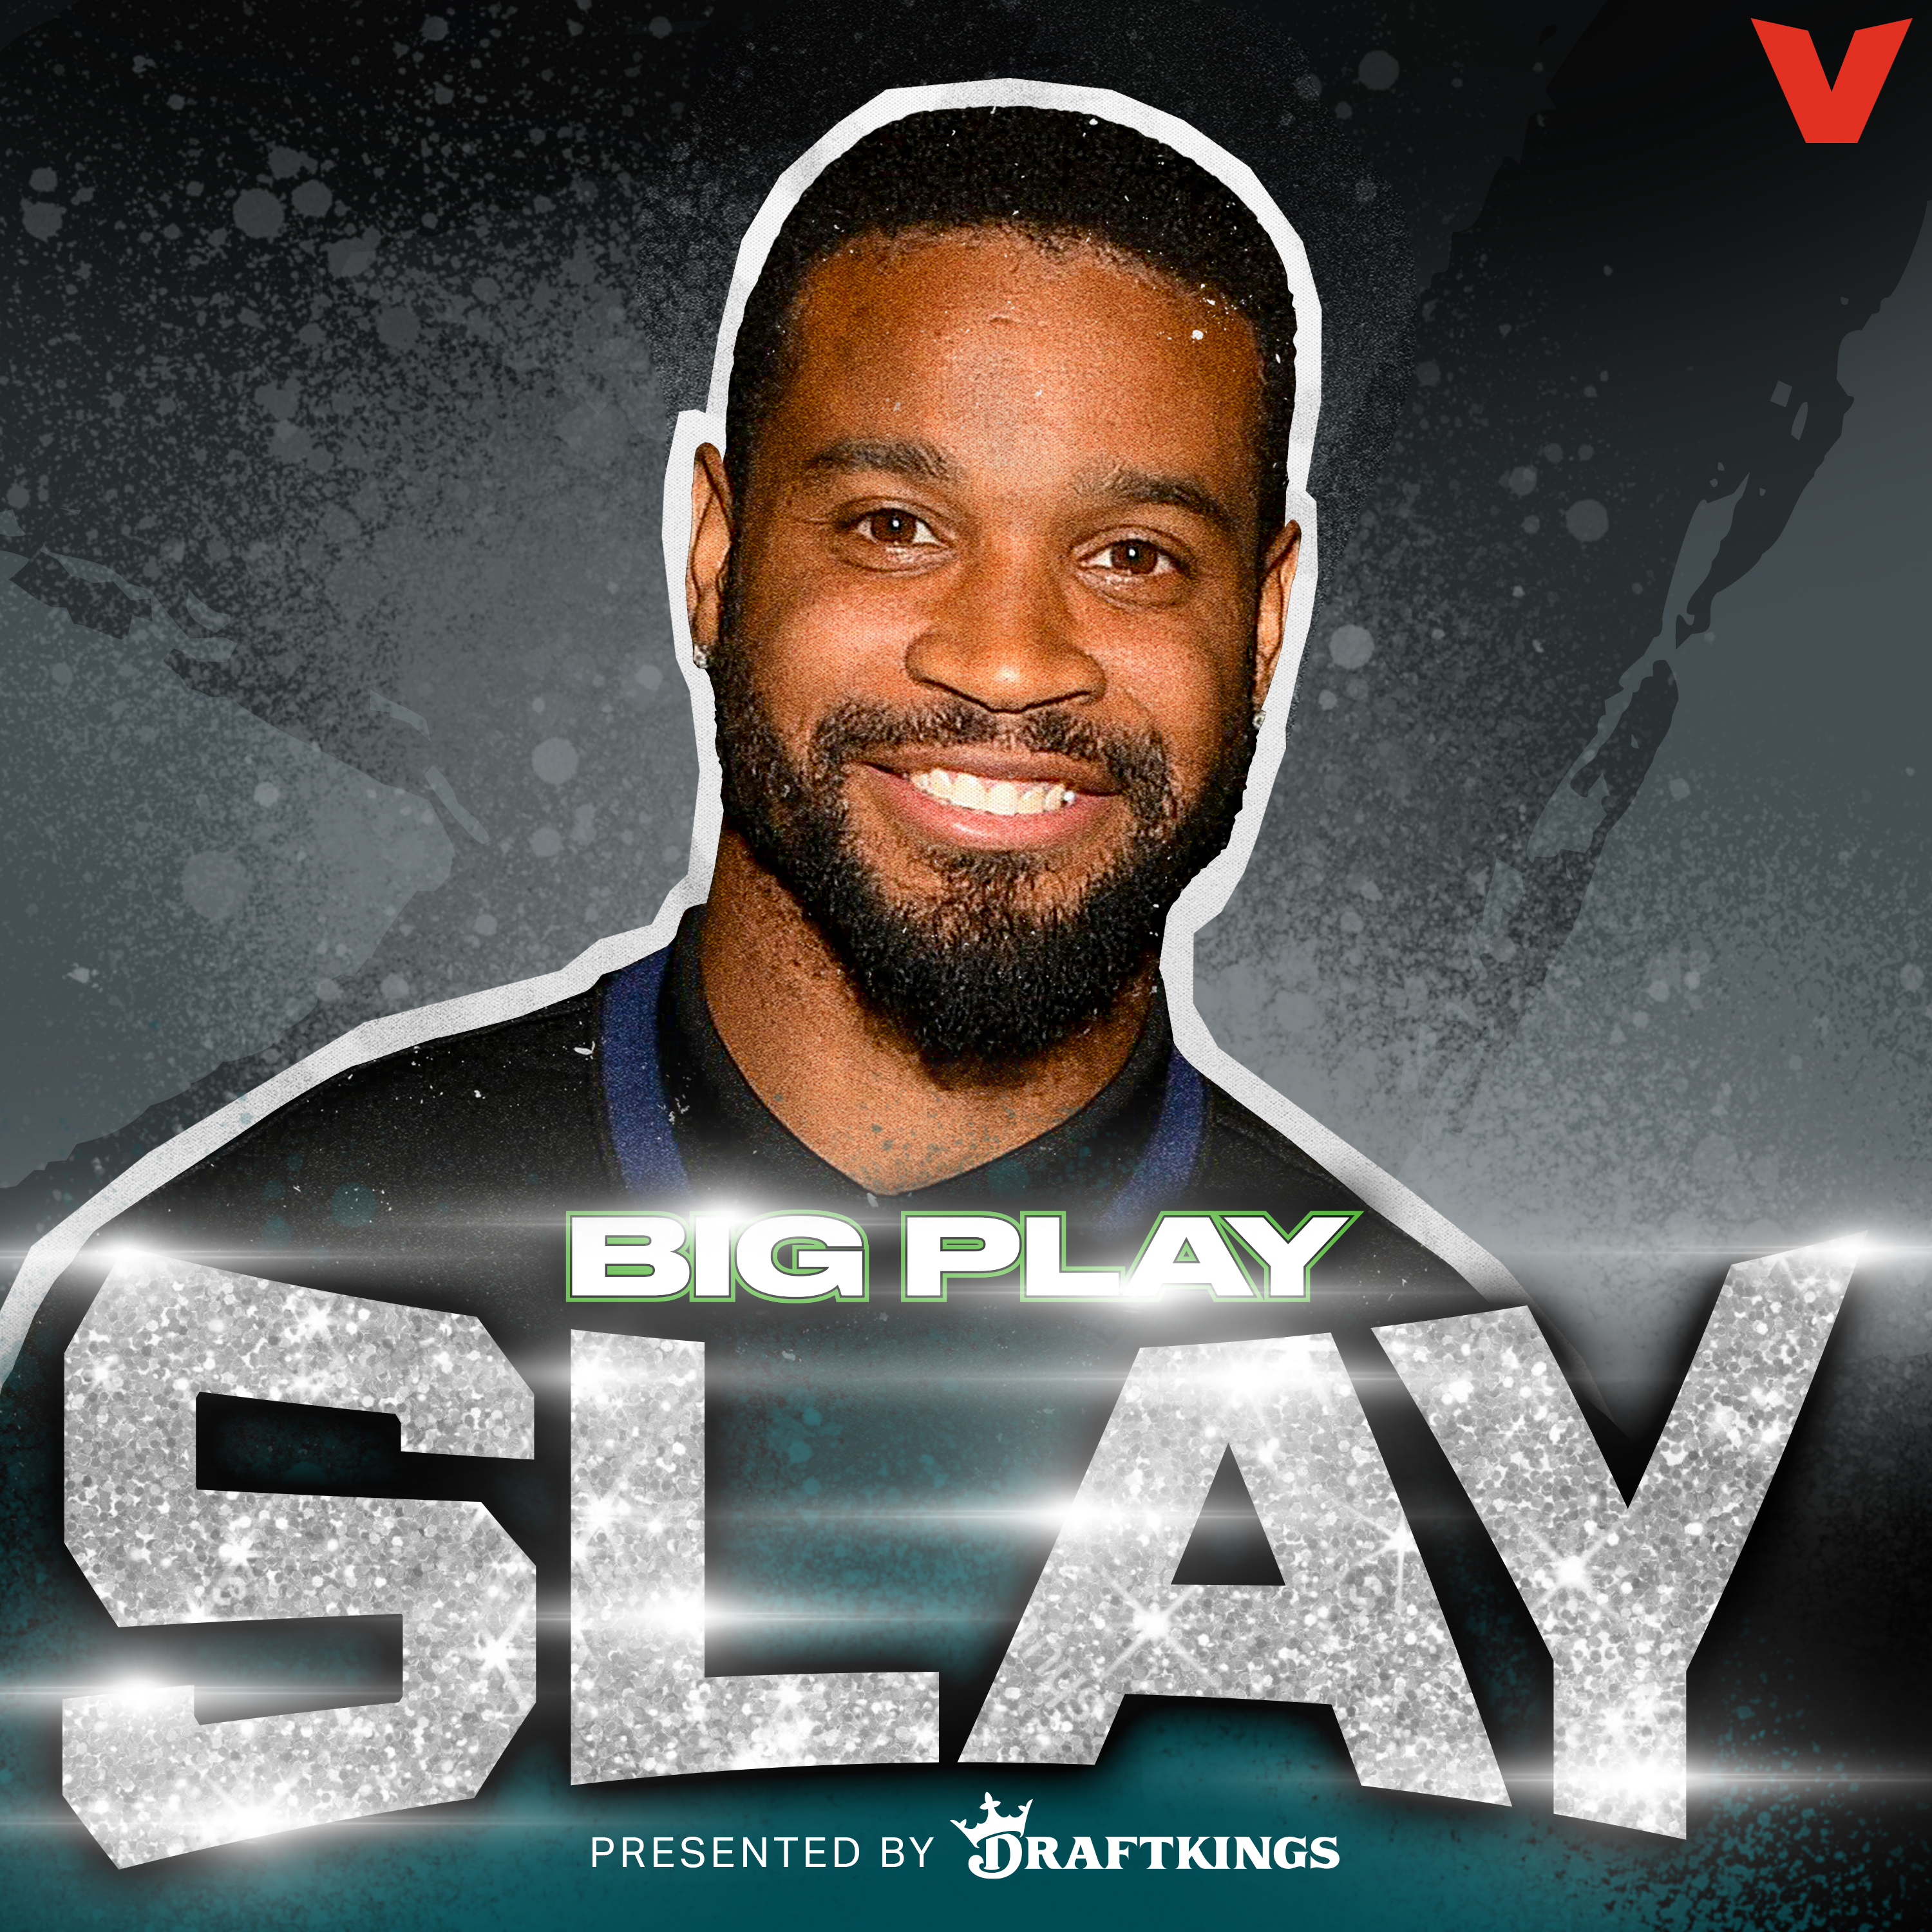 Big Play Slay - Darius Slay on “One of the most intense games I’ve played as an Eagle” vs. Cowboys